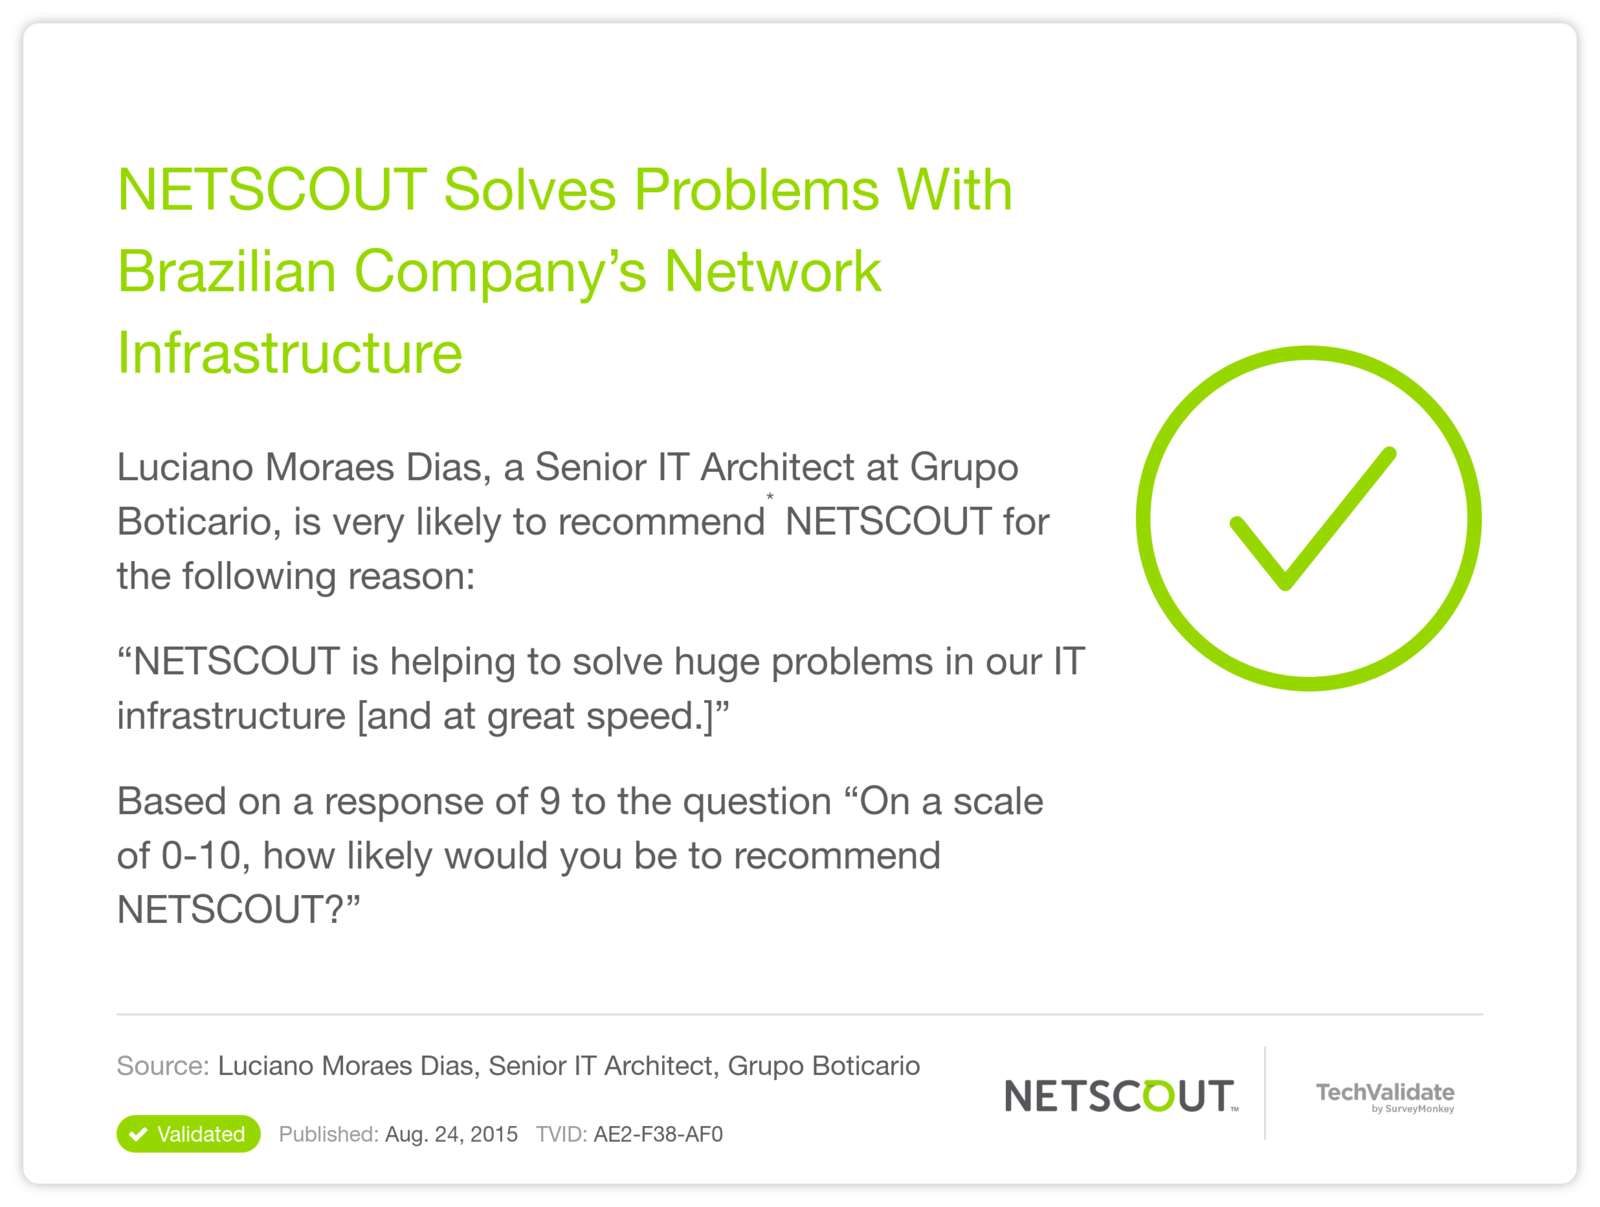 NETSCOUT Solves Problems With Brazilian Company's Network Infrastructure